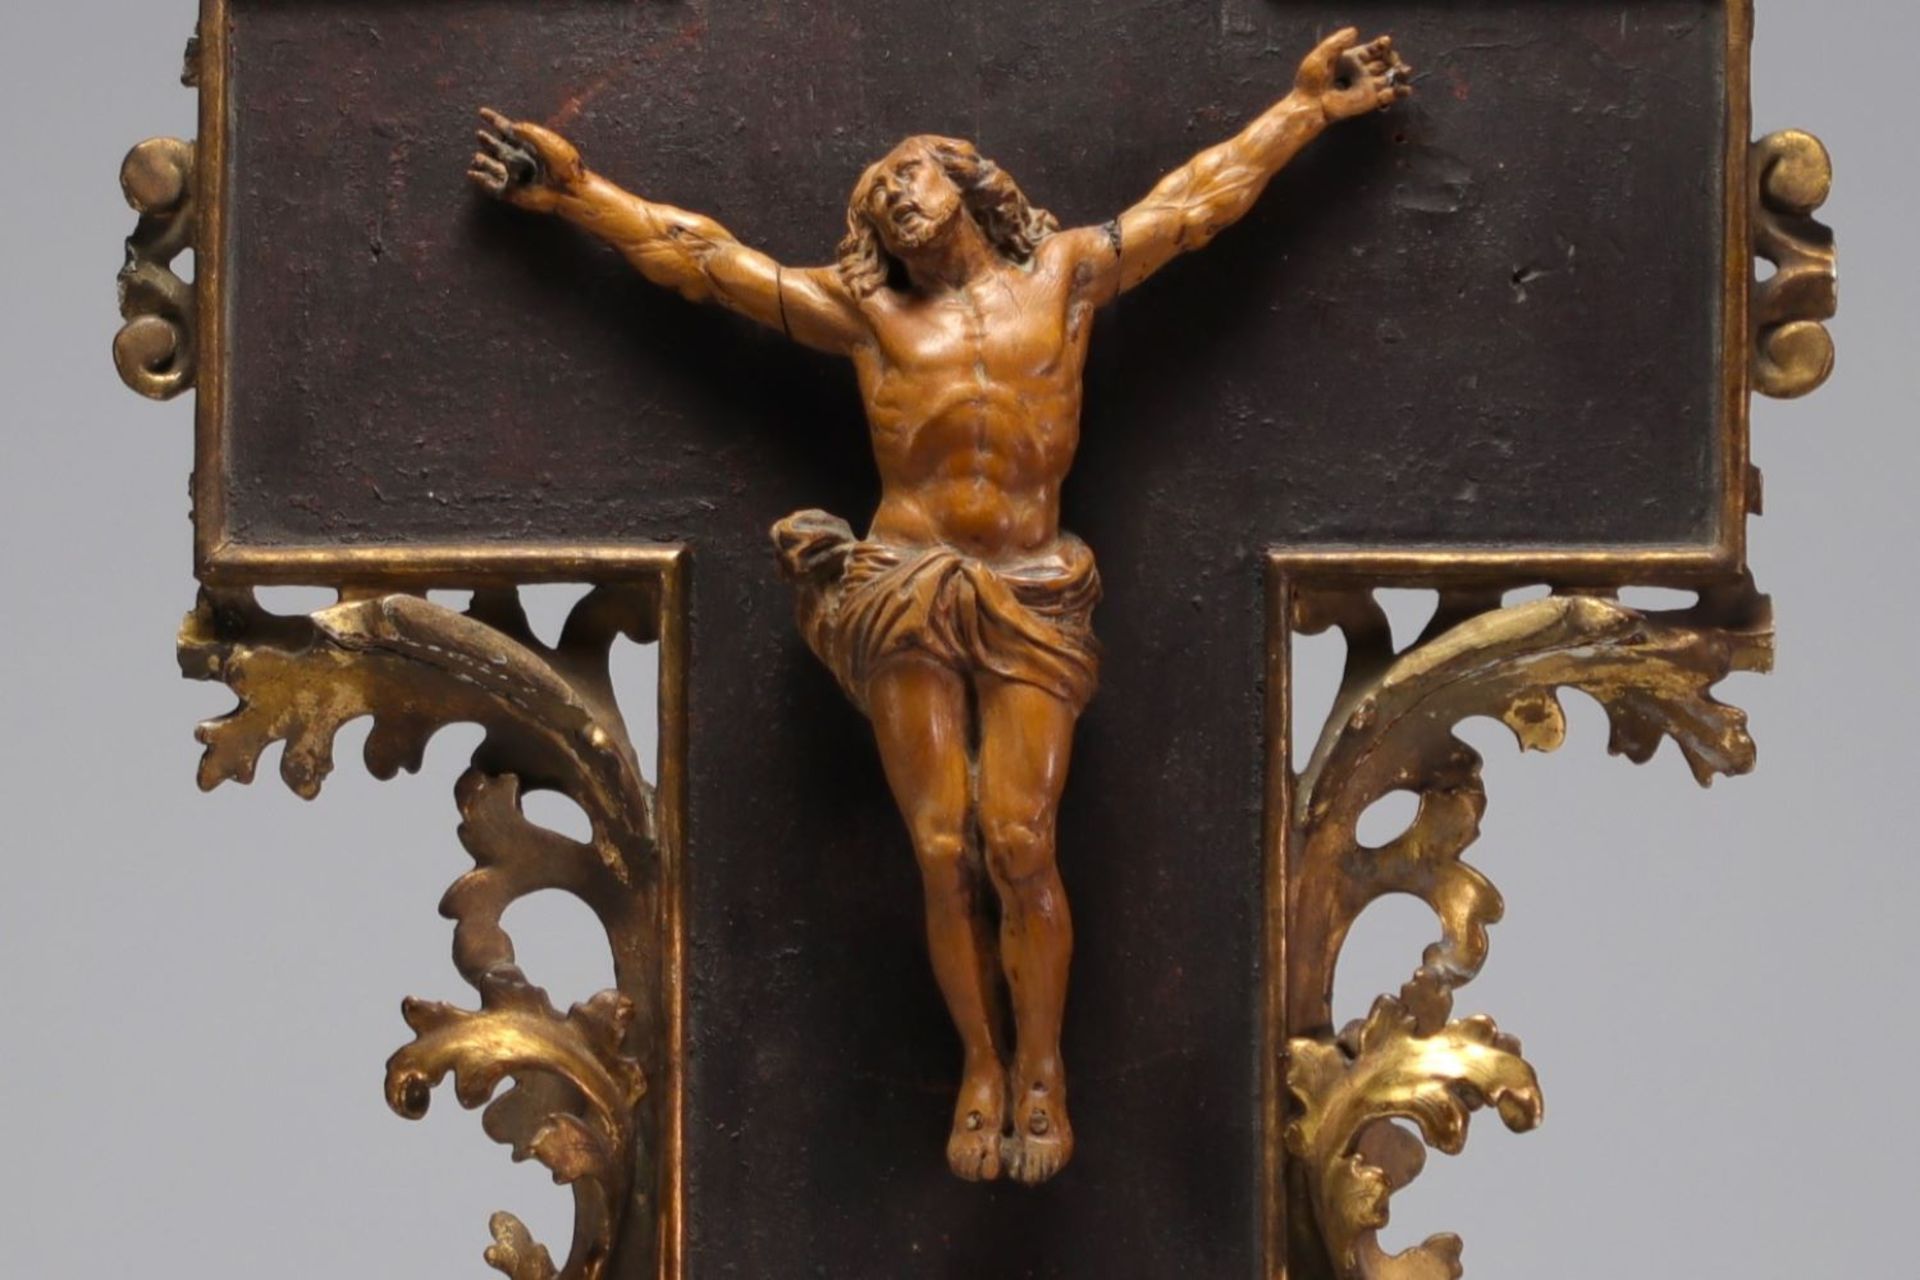 Christ in carved wood on a gilded wood frame, late 17th century (frame attached).